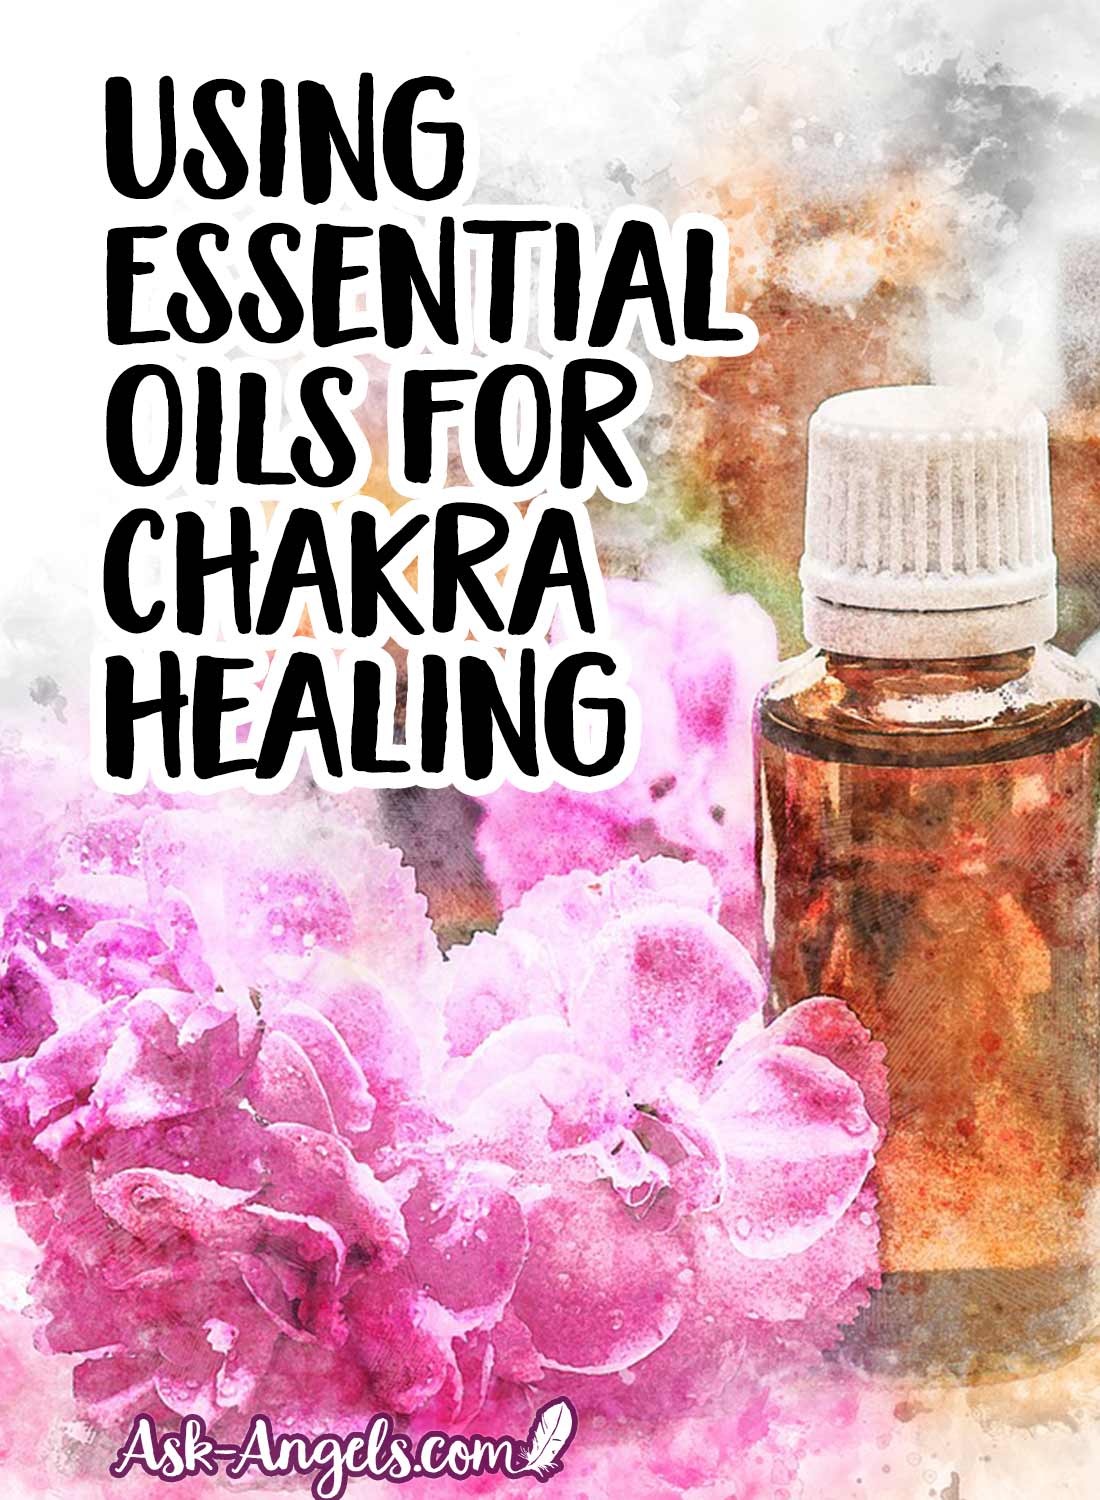 Using Essential Oils for Chakra Healing